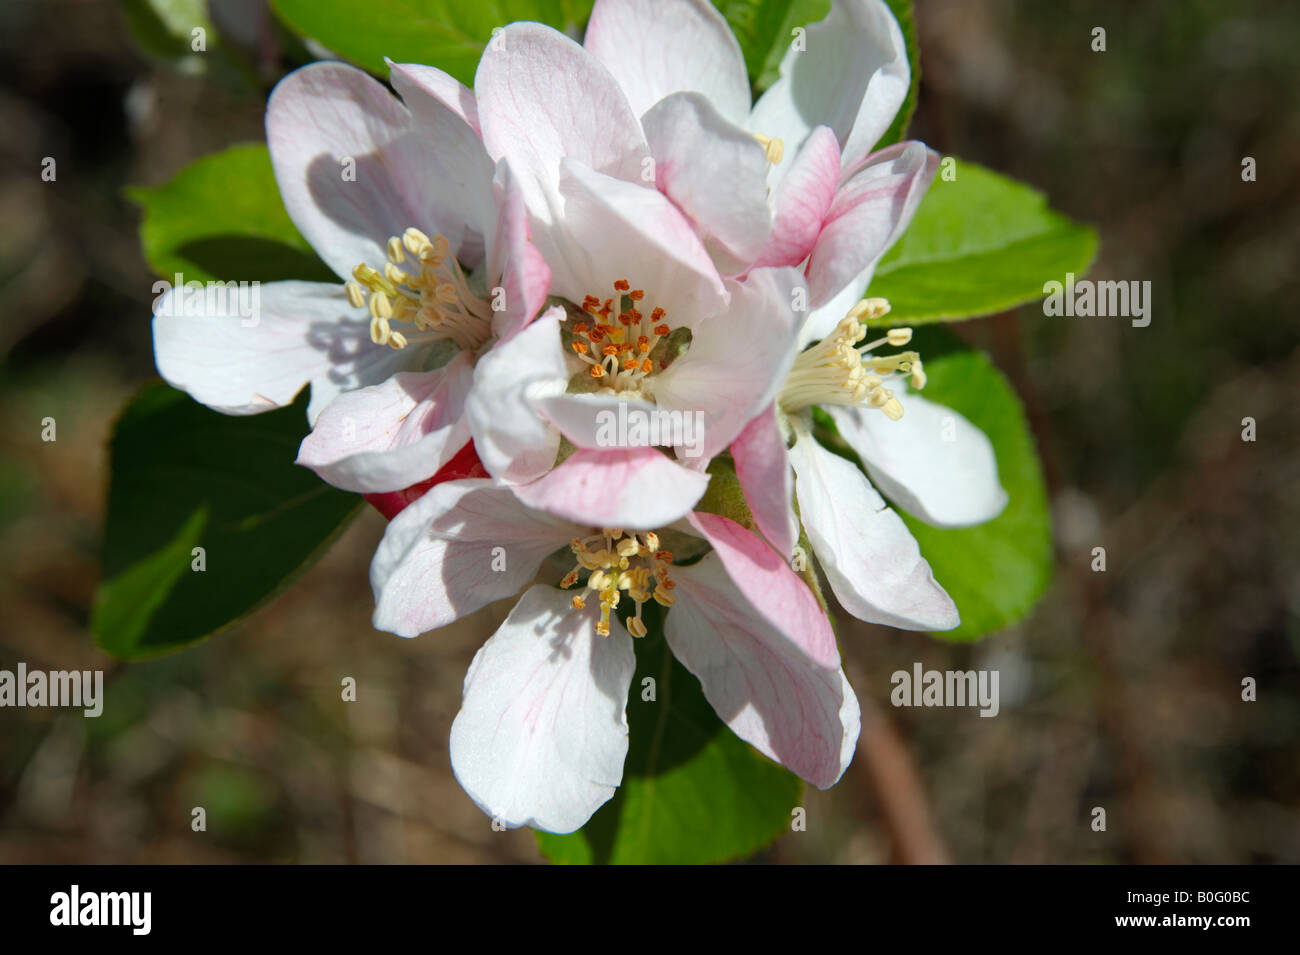 Apple Blossom flowering on a tree Stock Photo